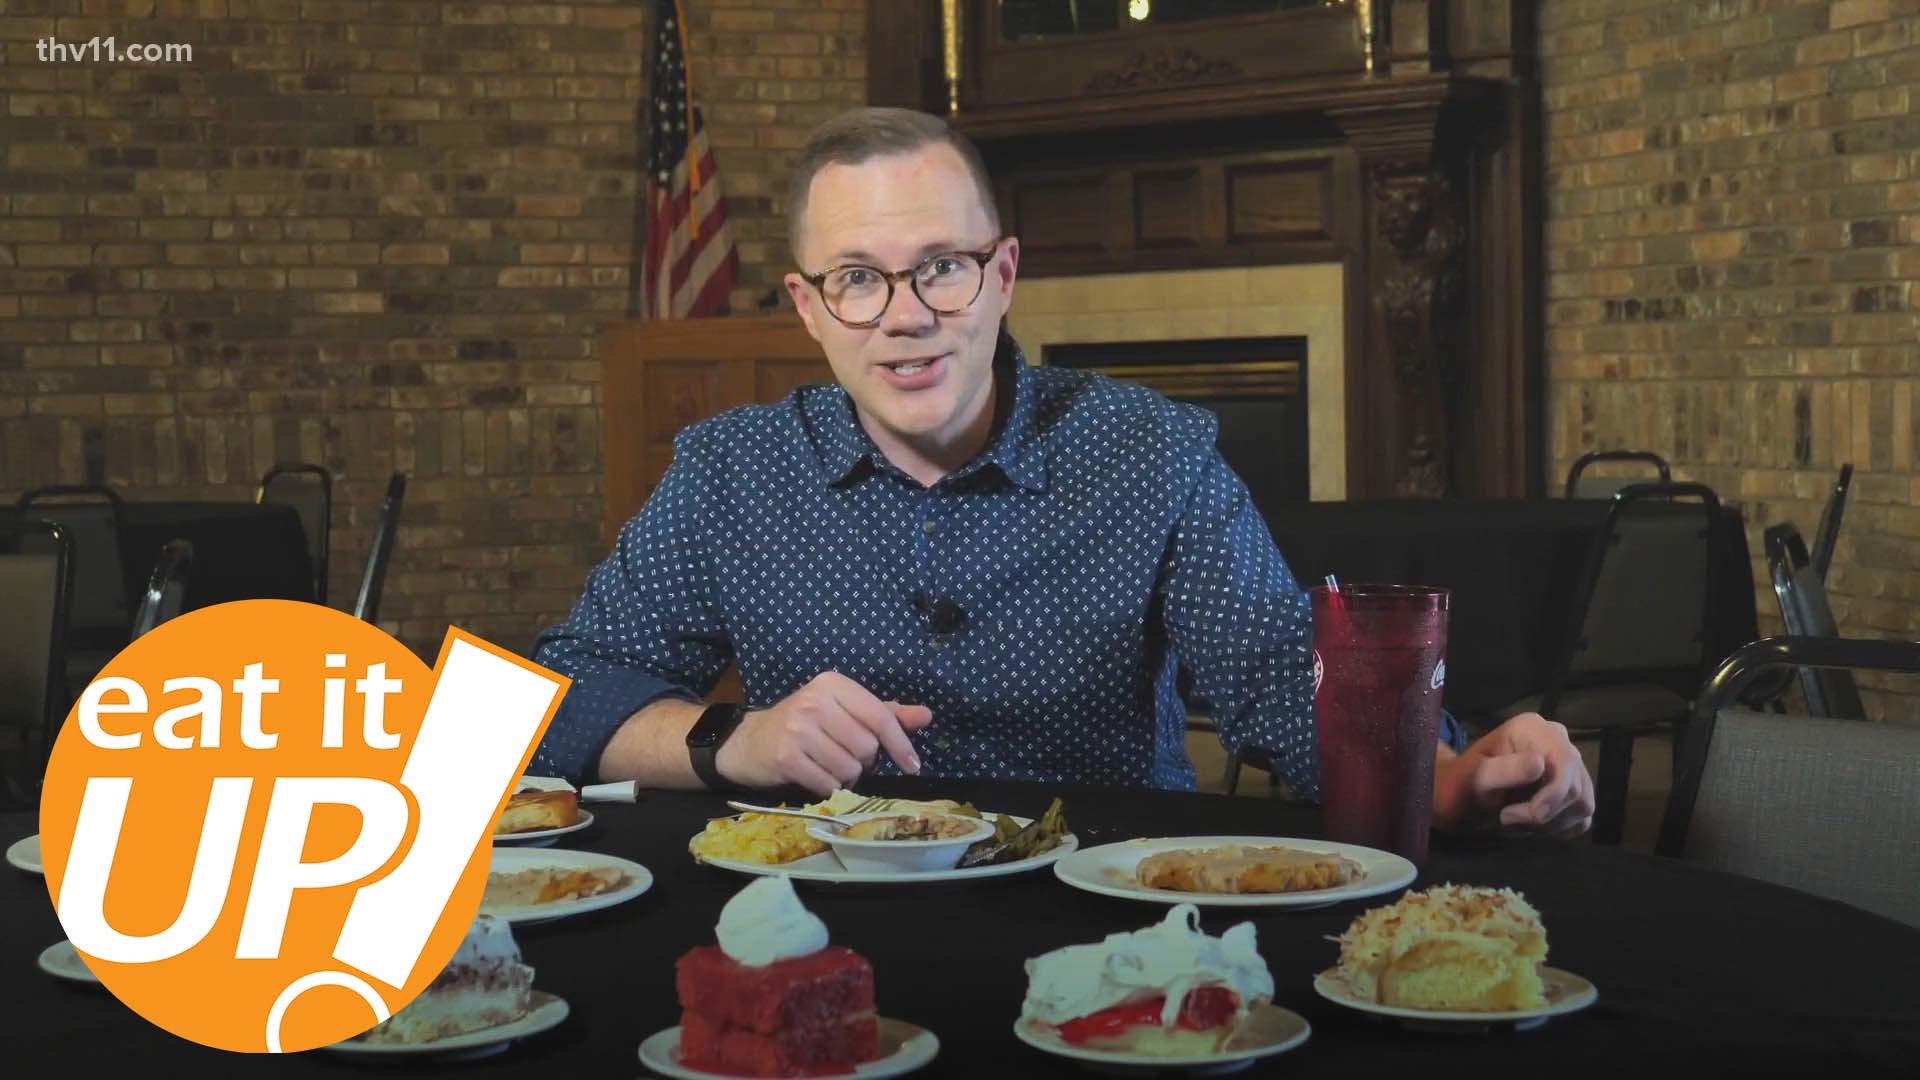 On this week's Eat It Up, Skot Covert visits Hole In the Wall Cafe, a homestyle restaurant in Conway famous for its southern cooking and signature fried cornbread.